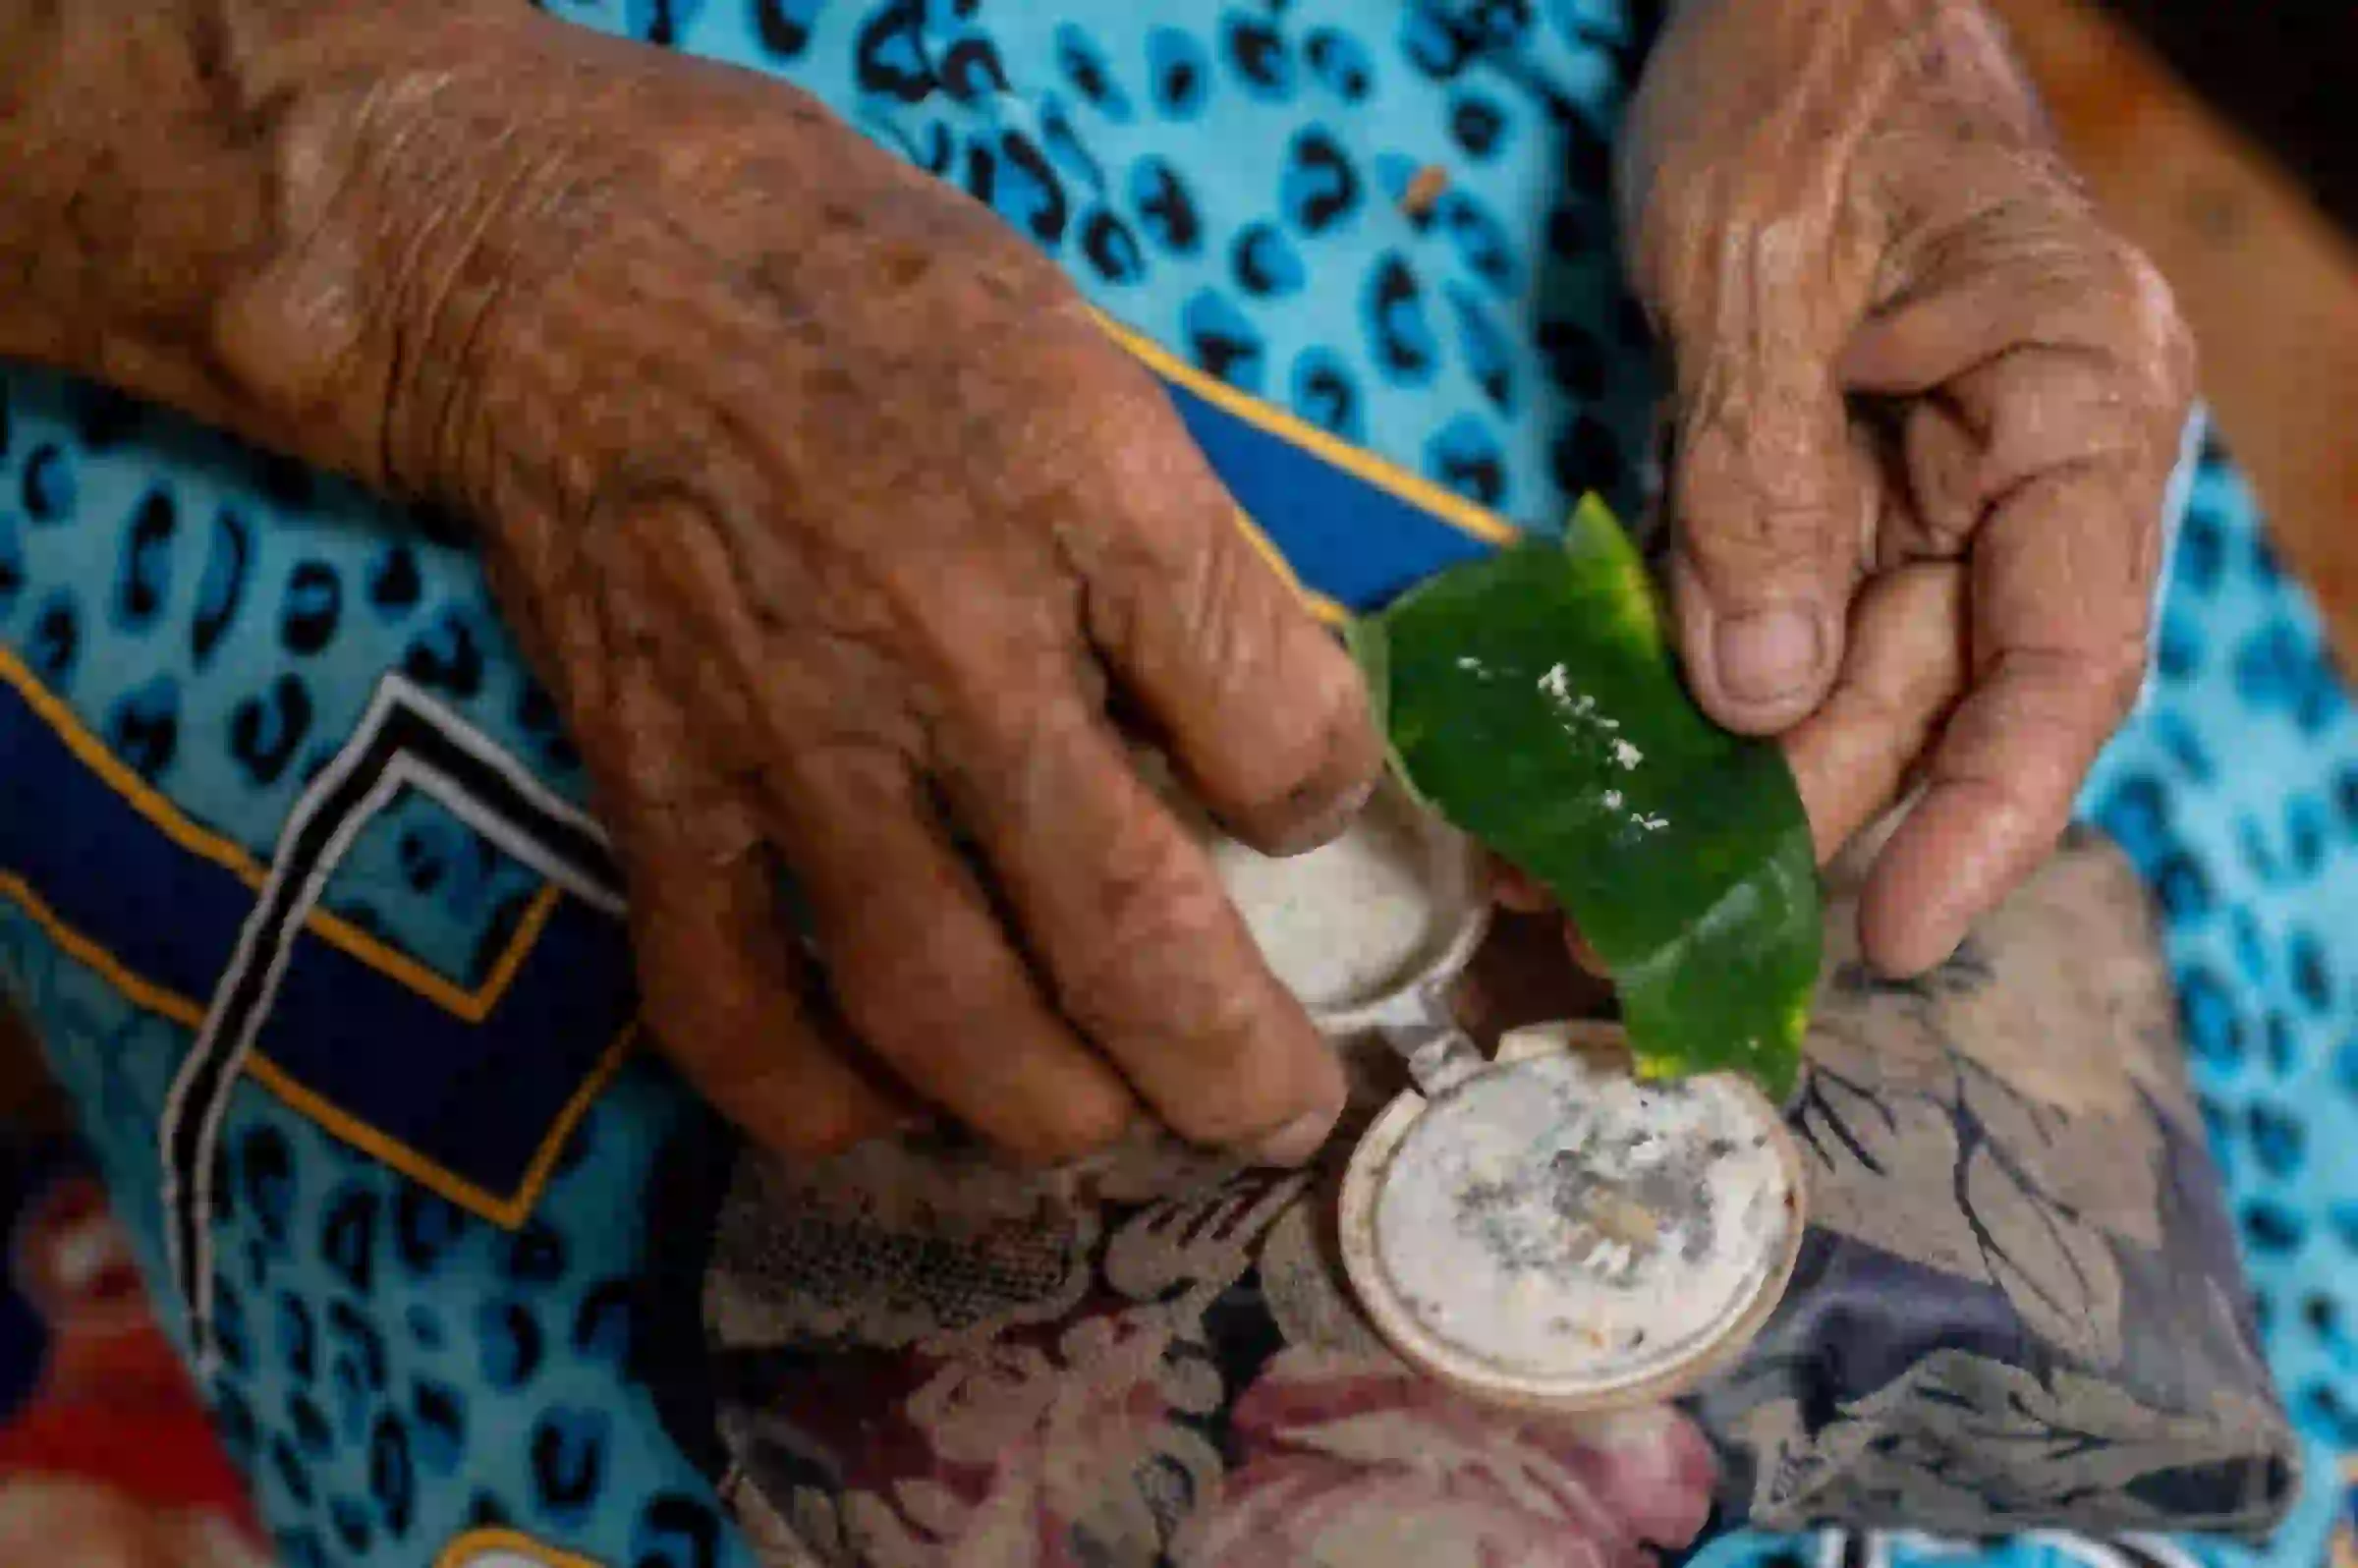 Maria Quilantang, a member of the Malaya Lolas, prepares her medicine, in Pampanga province, Philippines, August 24, 2023. Thomson Reuters Foundation/Lisa Marie David